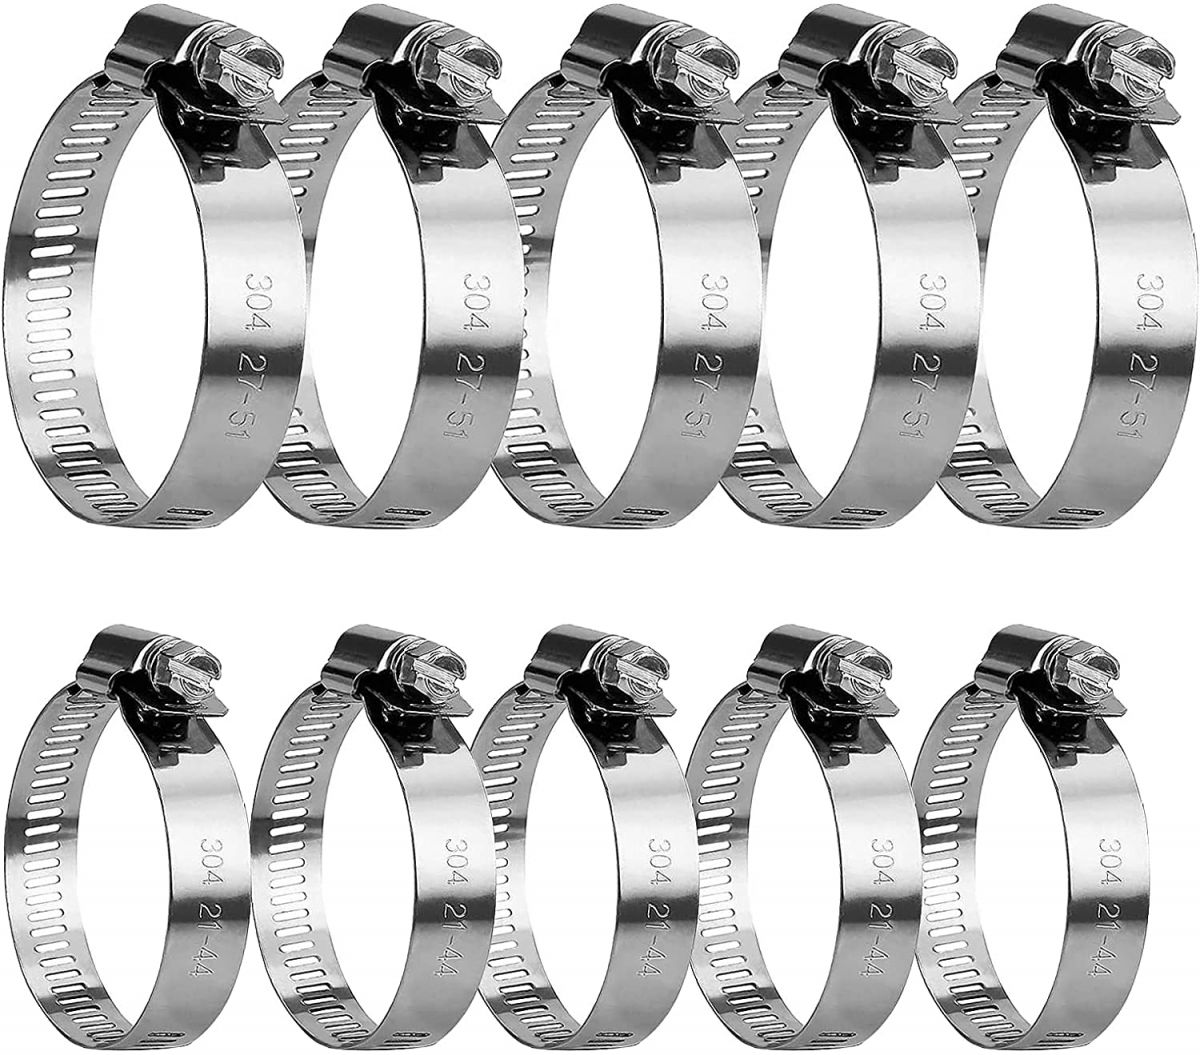 Clamp 21–51 mm. Pack of 10